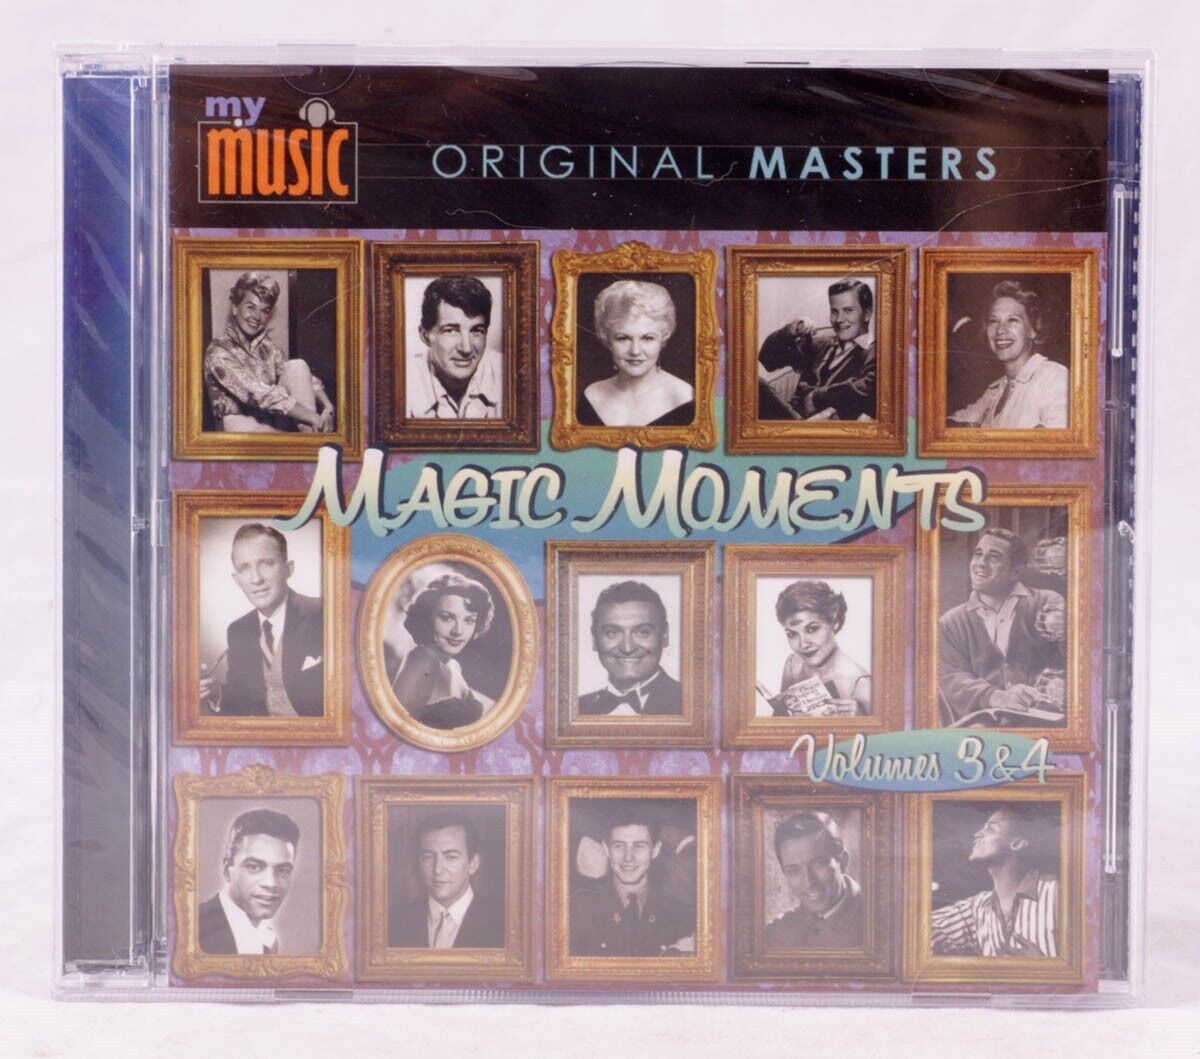 Primary image for Magic Moments Volumes 3 & 4 My Music Original Masters CD compilation 2 disc set